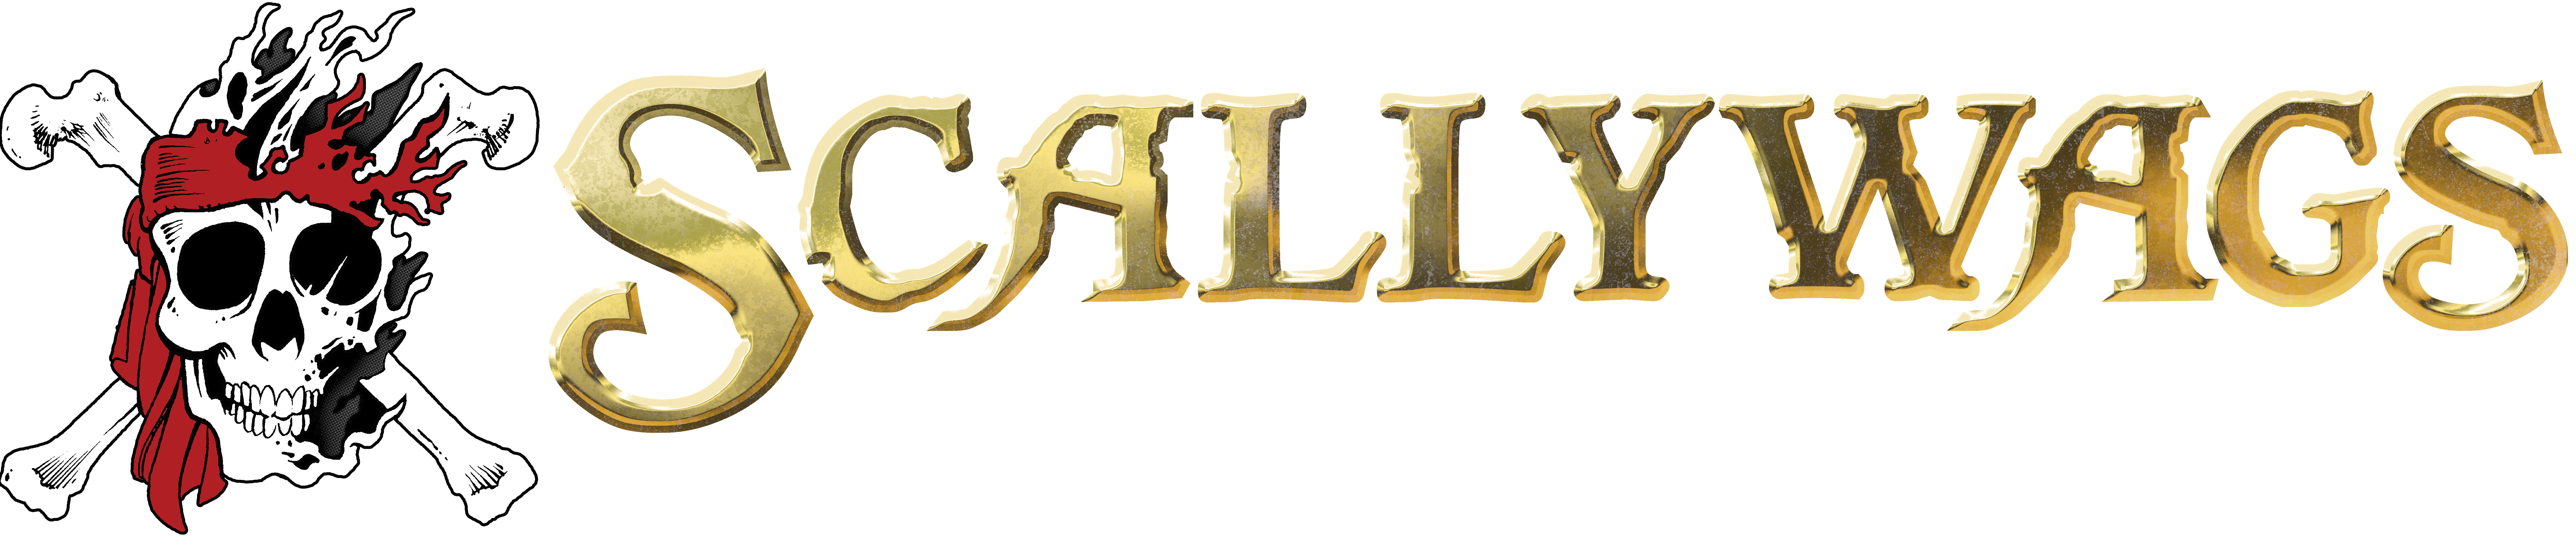 Scallywags Pirate Adventures